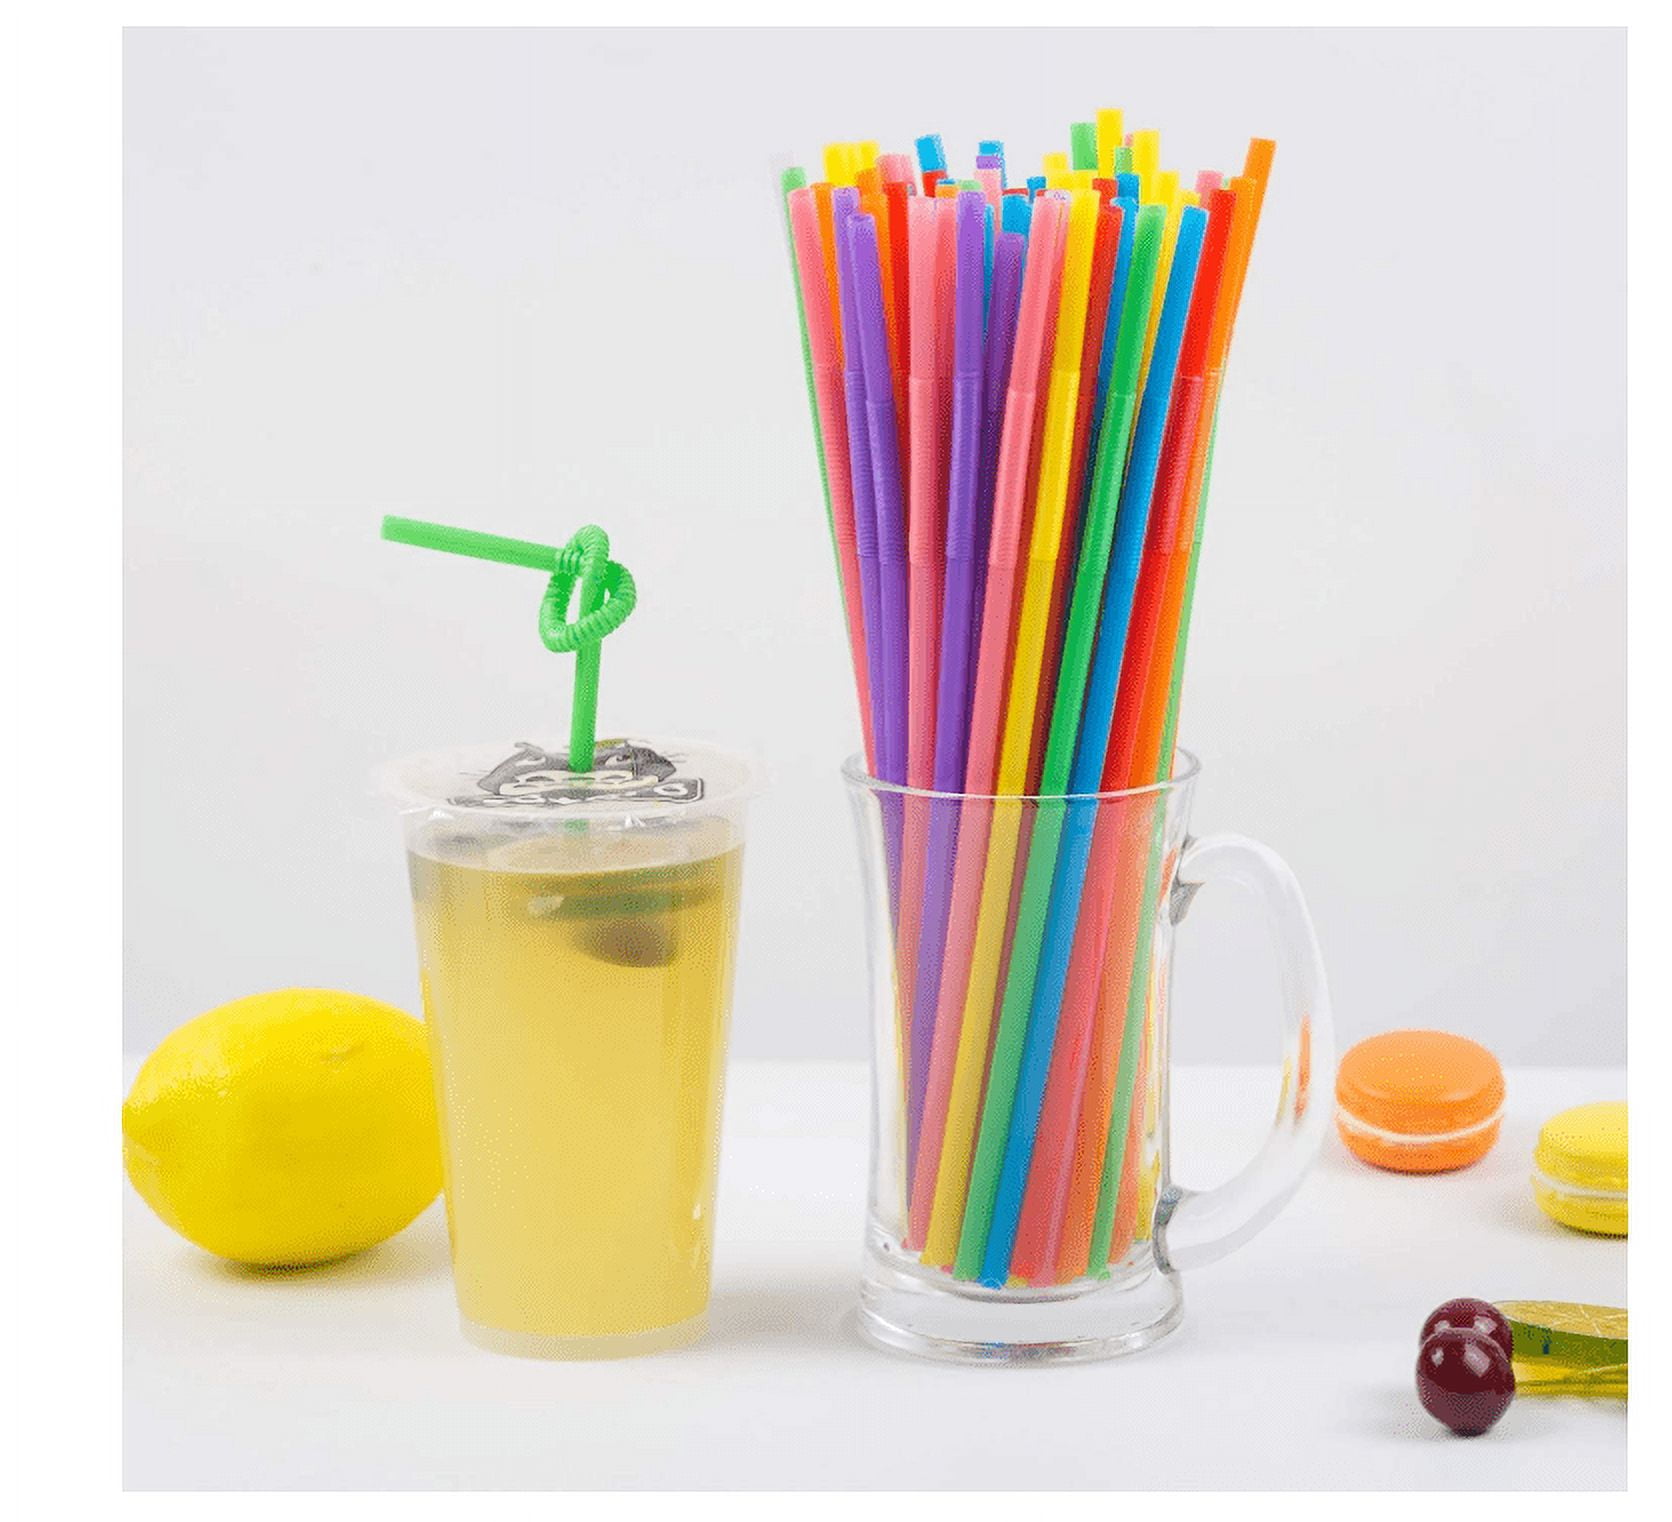 Reusable drinking straws, eh? : r/funny